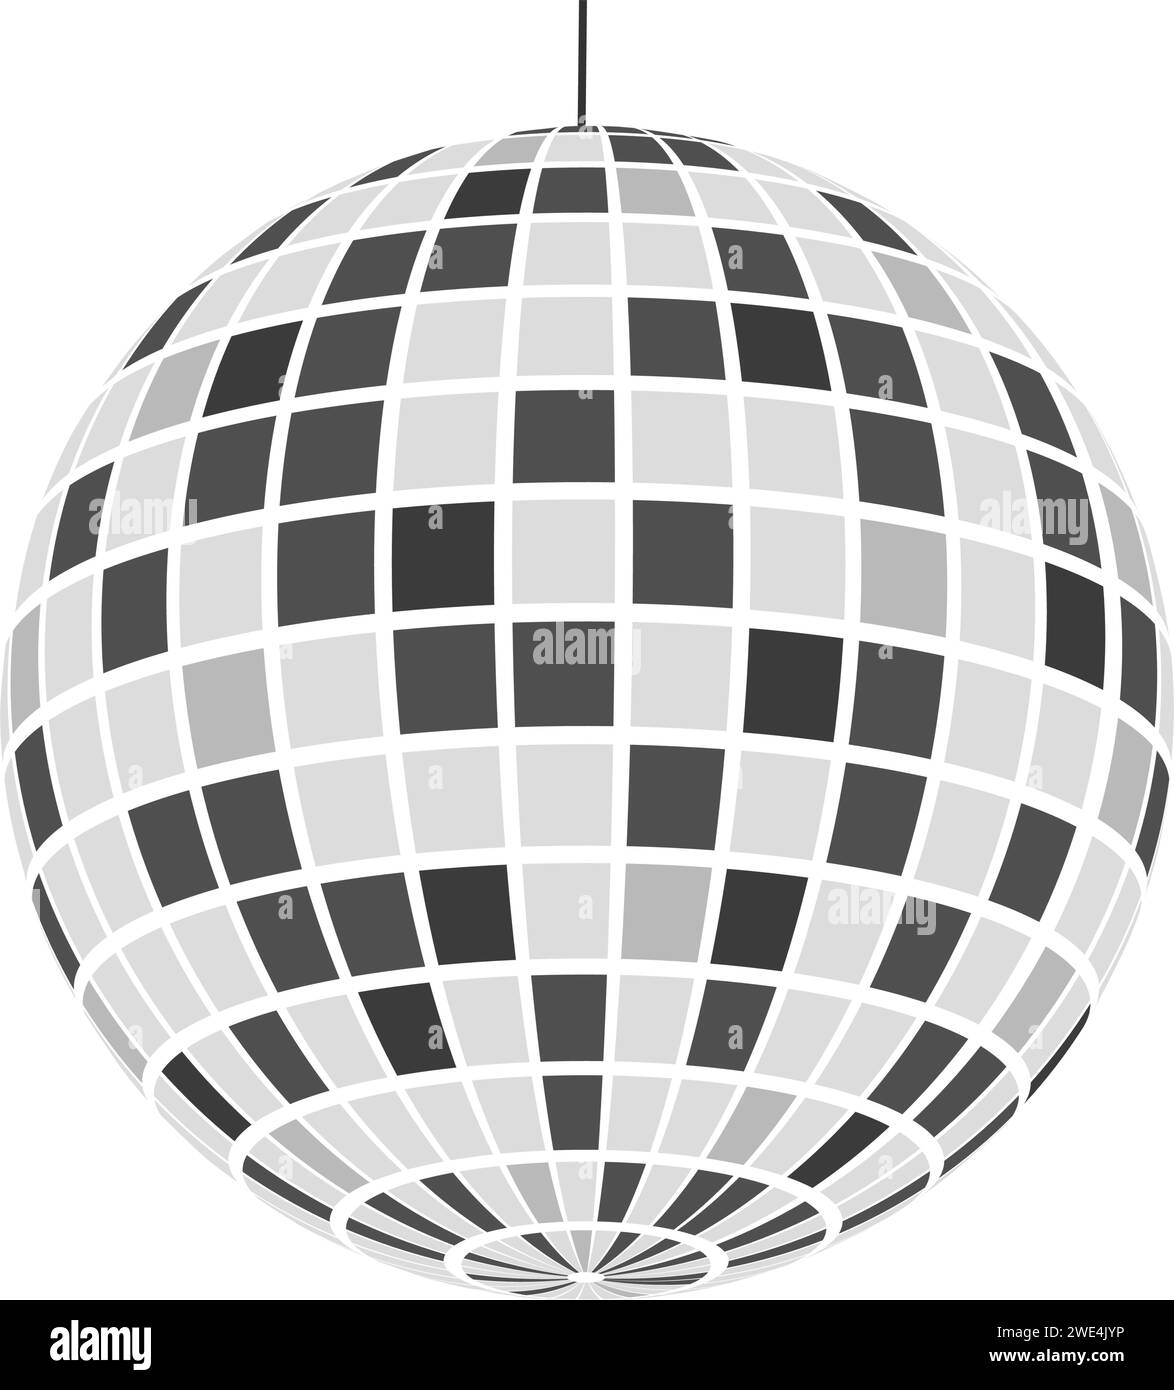 Discoball icon. Shining night club sphere. Dance music party glitterball. Mirrorball in 70s 80s retro discotheque style. Nightlife symbol isolated on Stock Vector